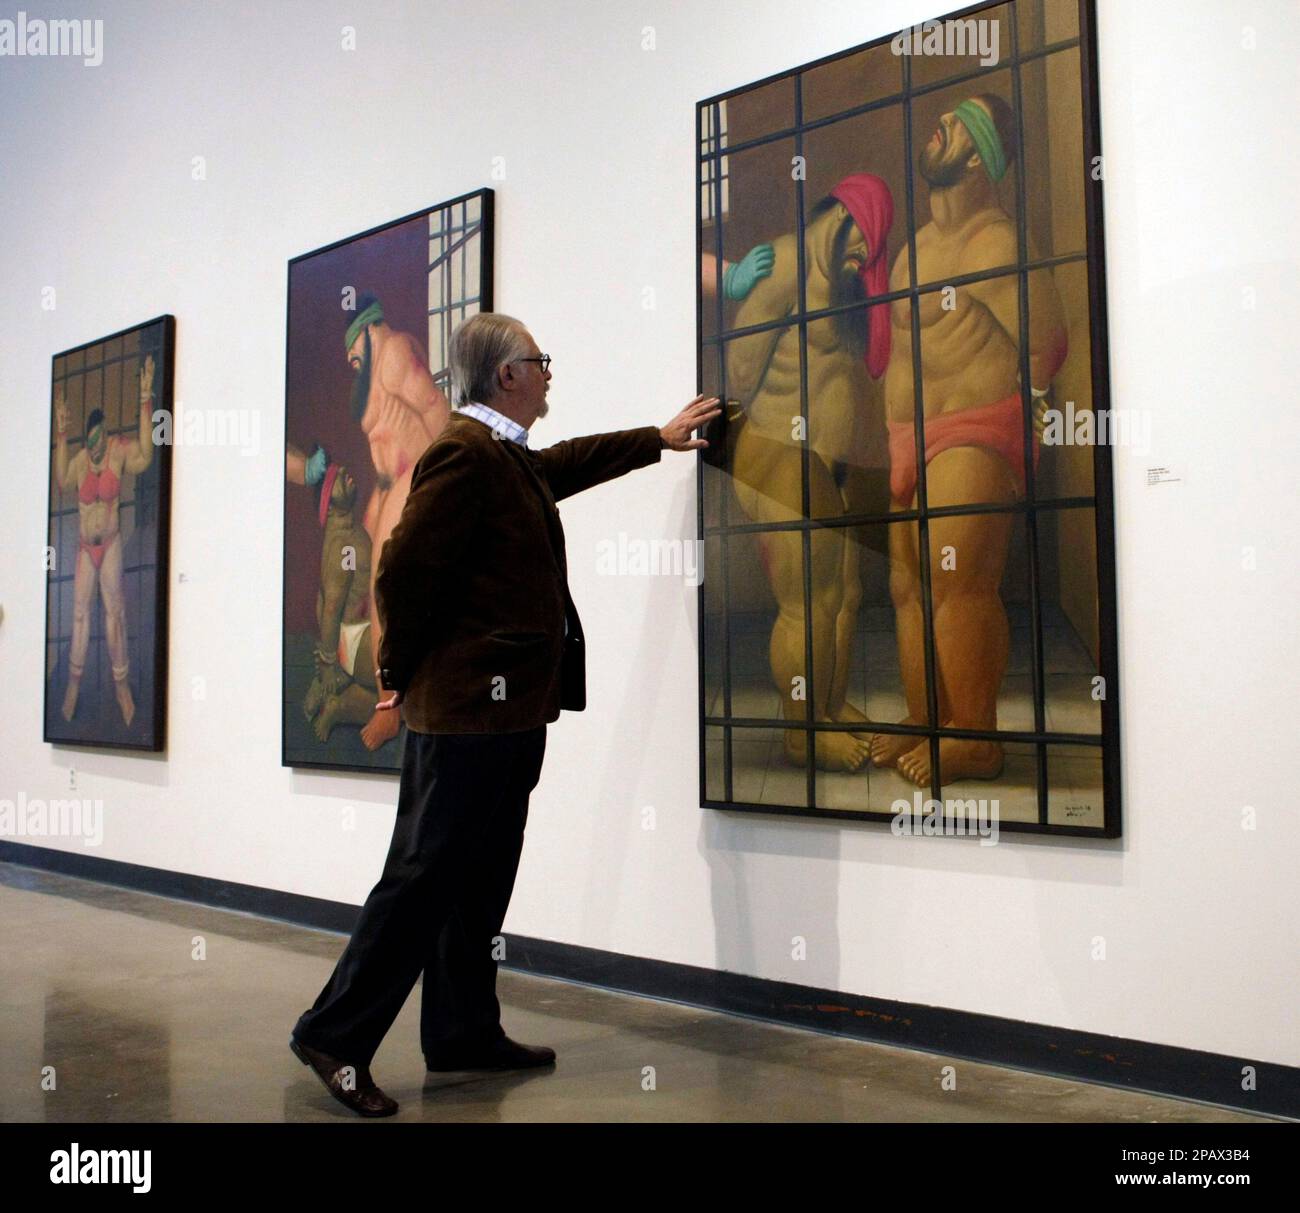 ** EDS NOTE: GRAPHIC CONTENT ** Colombia artist Fernando Botero looks over one of his works at a first complete U.S. showing of "Art of Confrontation," his seventy-nine paintings and drawings on Abu Ghraib prison, Monday, Nov. 5, 2007, at American University Museum in Washington.(AP Photo/Pablo Martinez Monsivais) Stock Photo